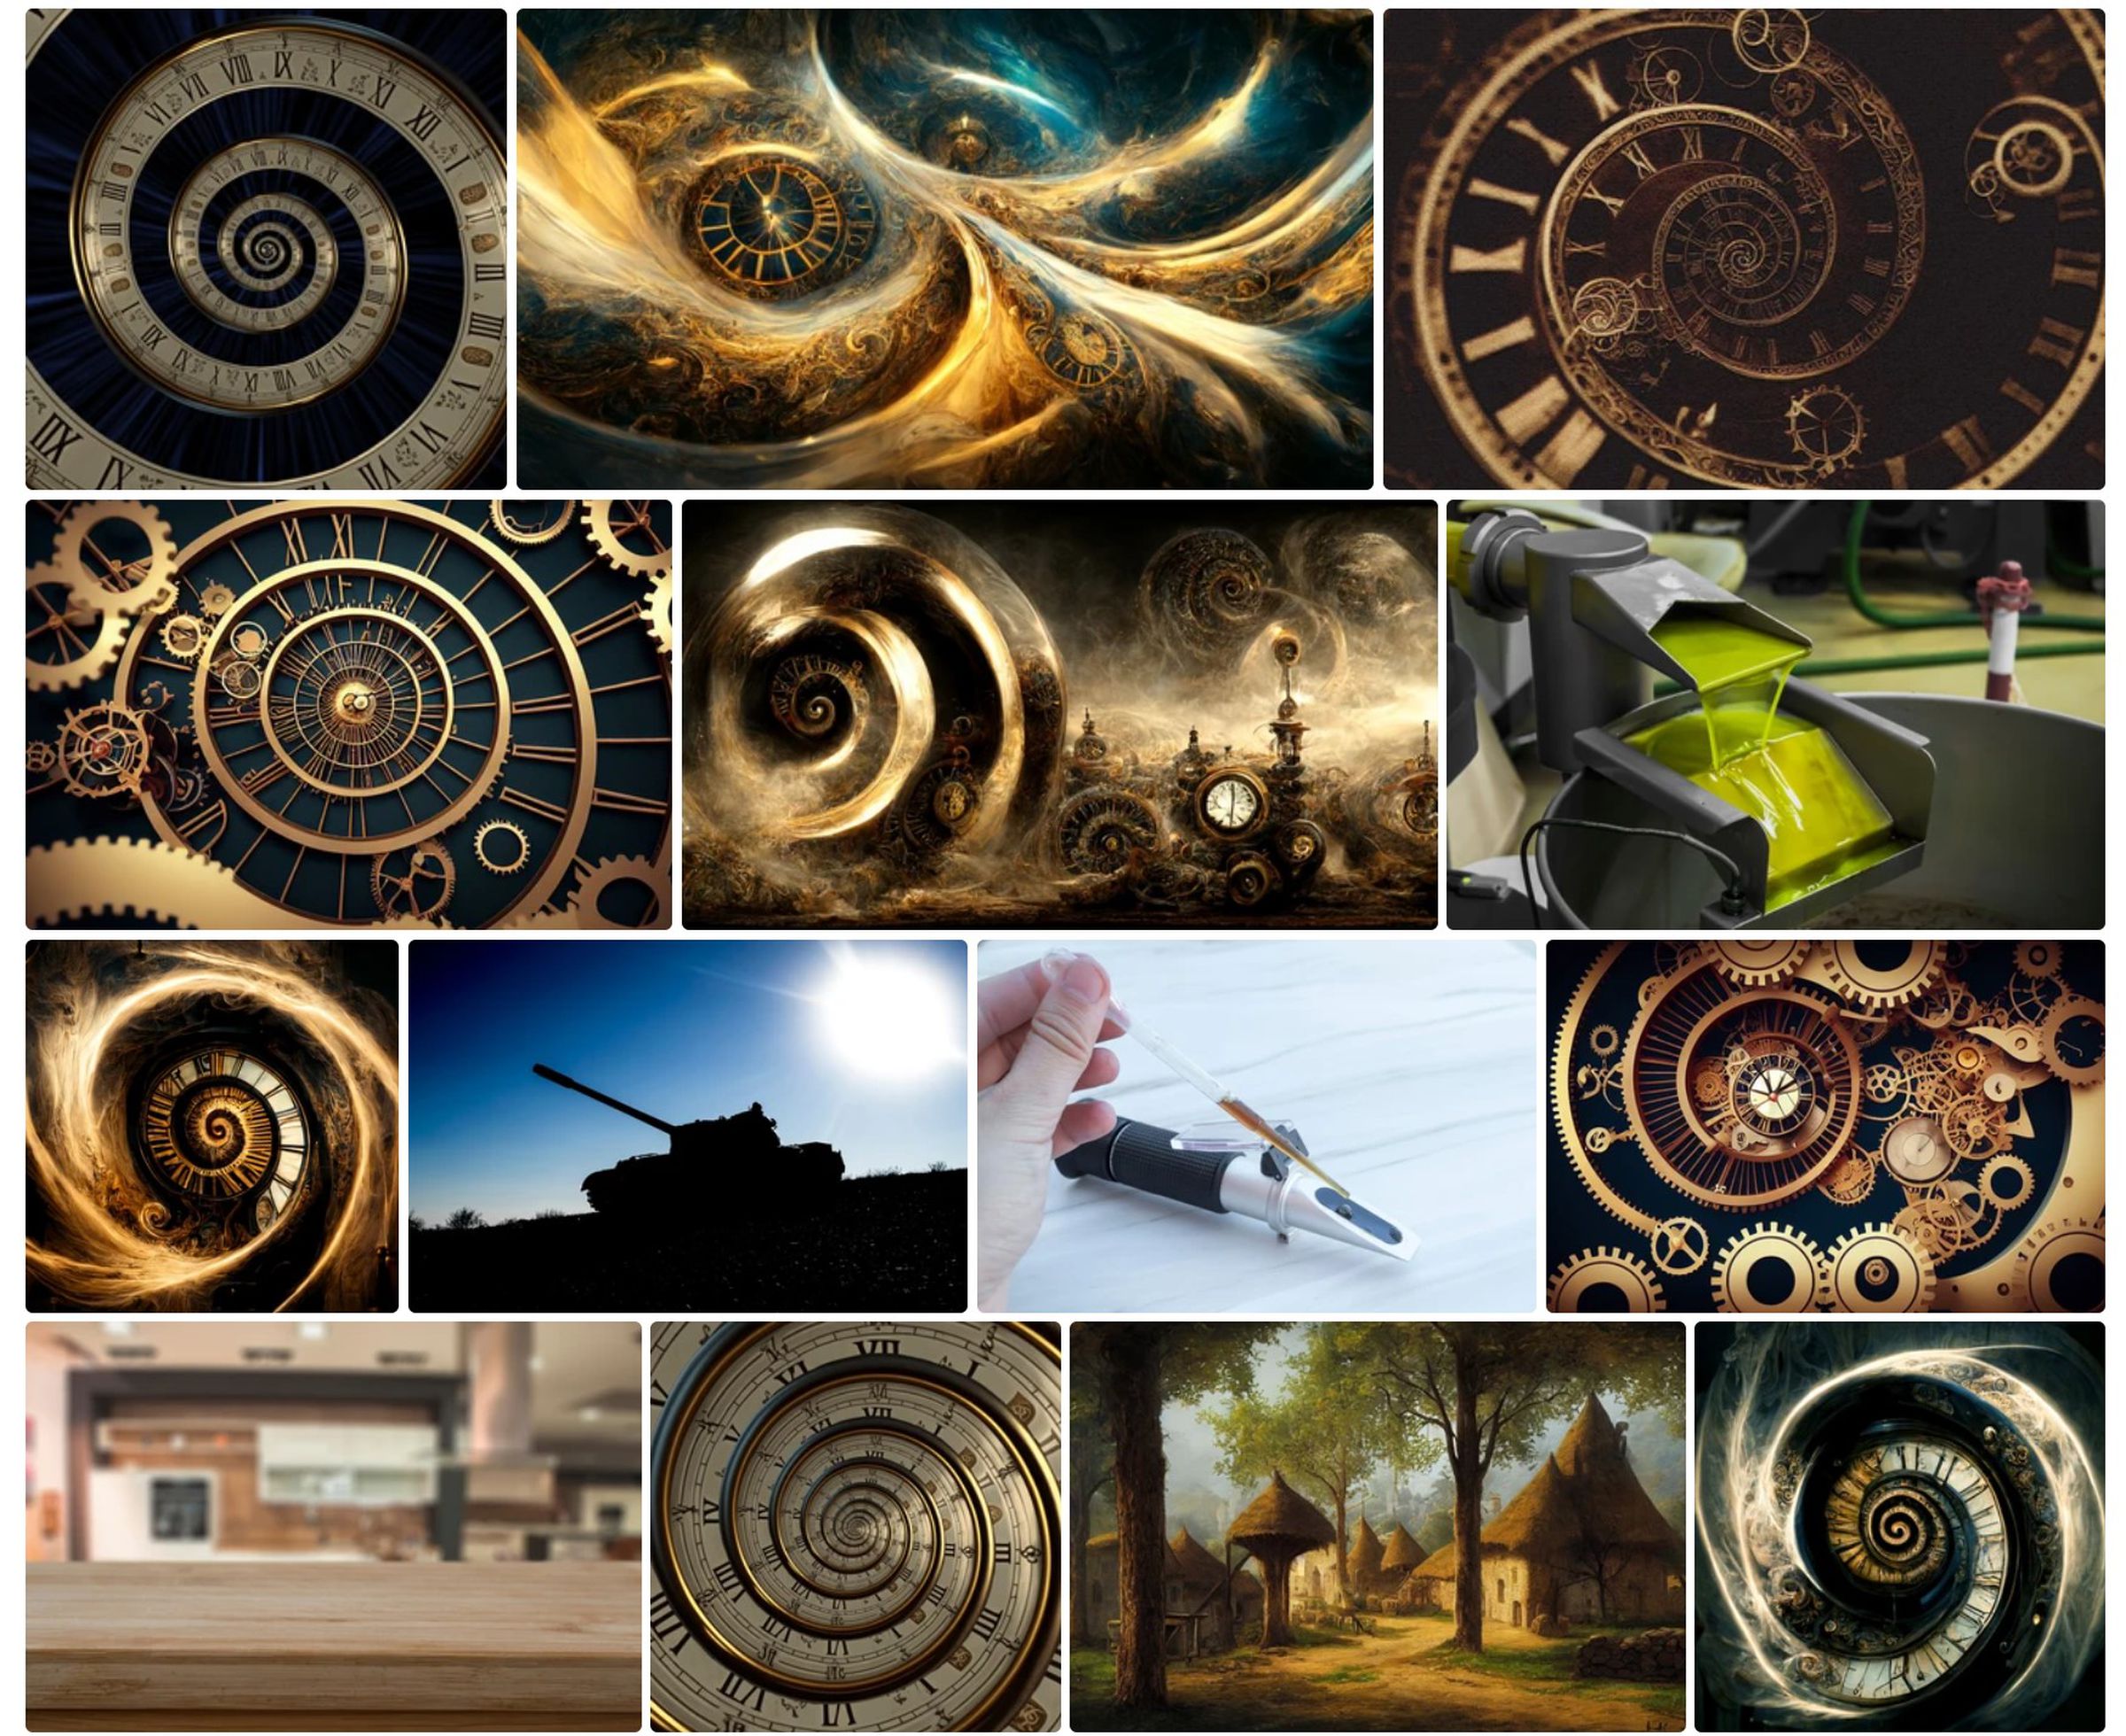 A screenshot taken from Shutterstock displaying images that are likely AI-generated.